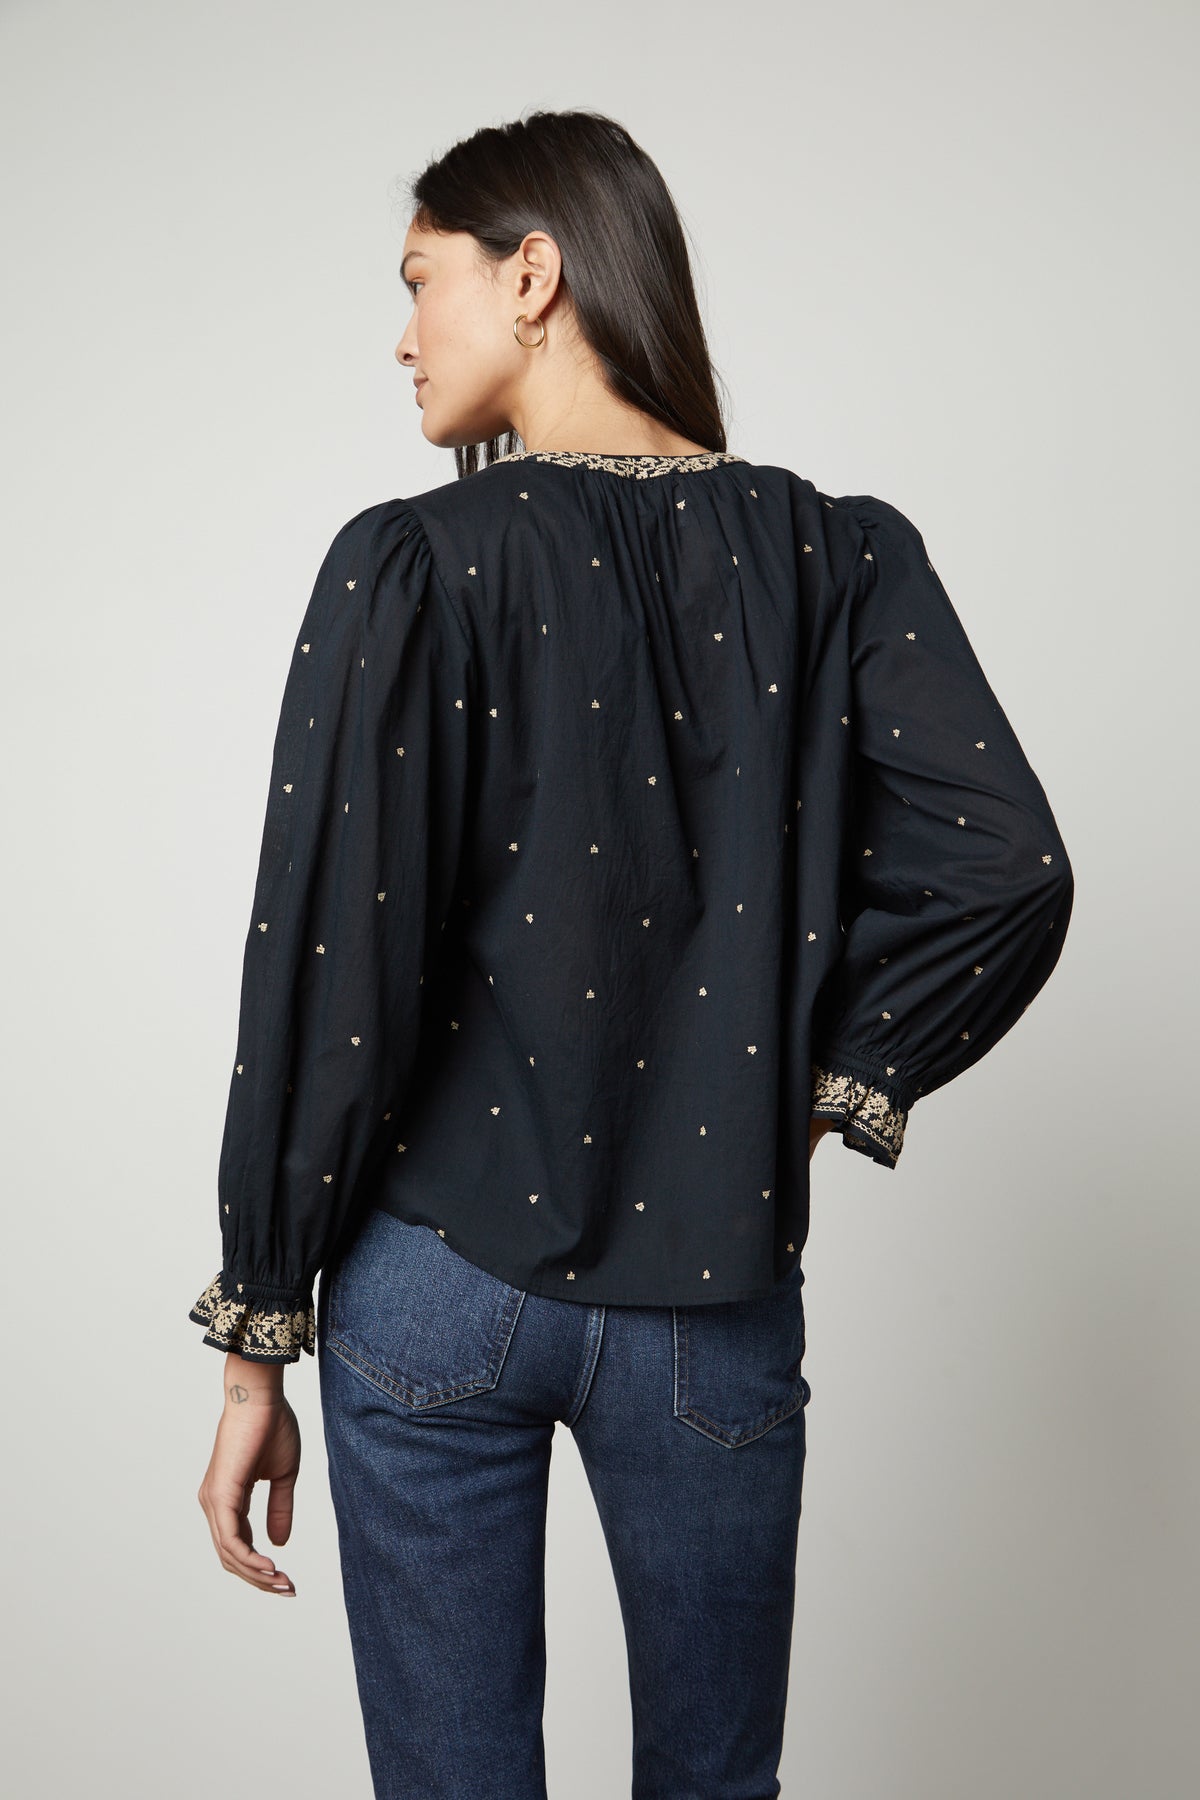 The back view of a woman wearing ANIA EMBROIDERED BOHO TOP by Velvet by Graham & Spencer jeans.-26727642497217